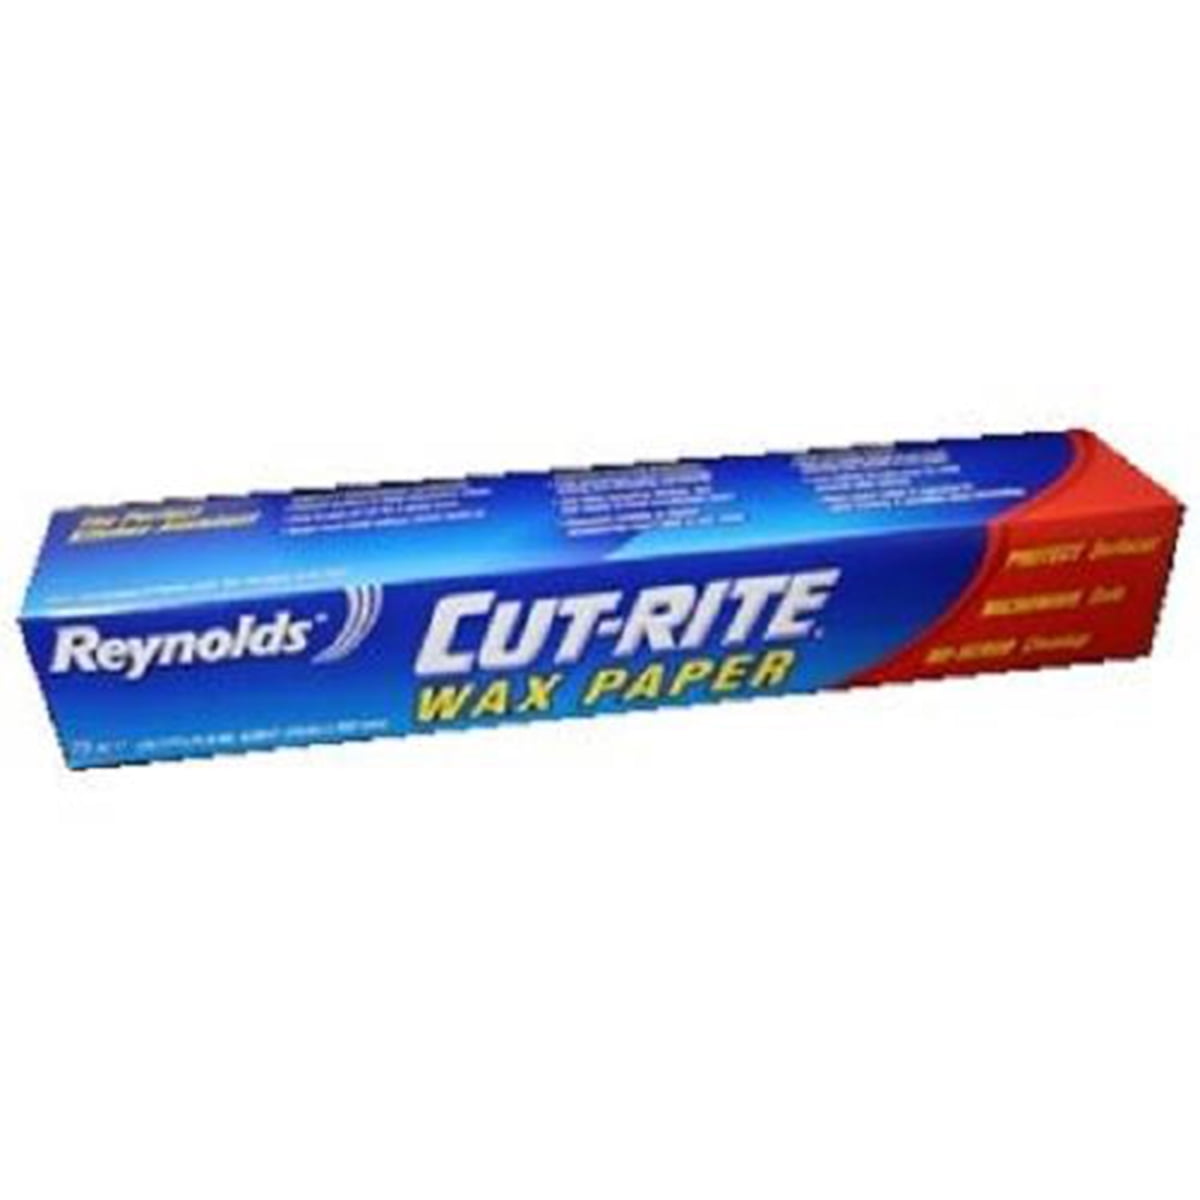 Details about  / Cut-Rite Wax Paper by Reynolds Non-Stick 75 Sq.Ft